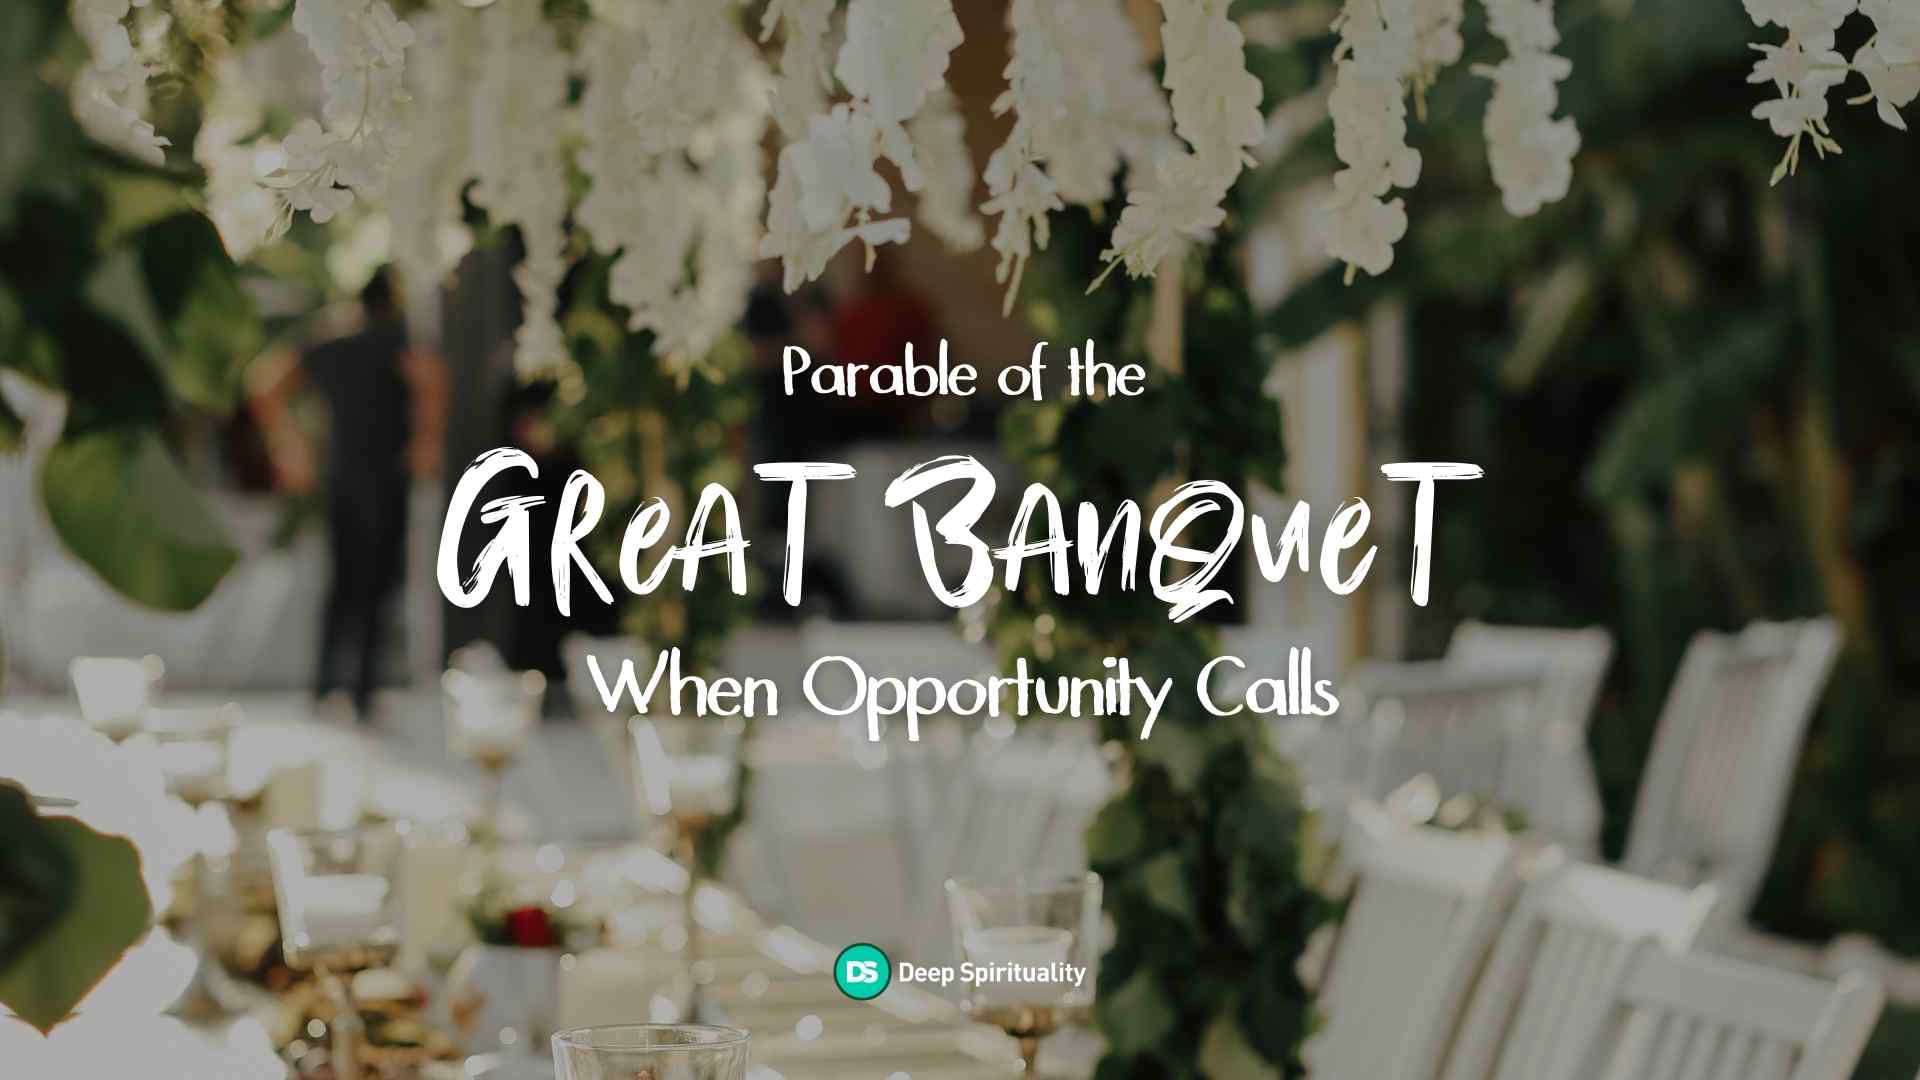 Parable of the Great Banquet: When Opportunity Calls 6